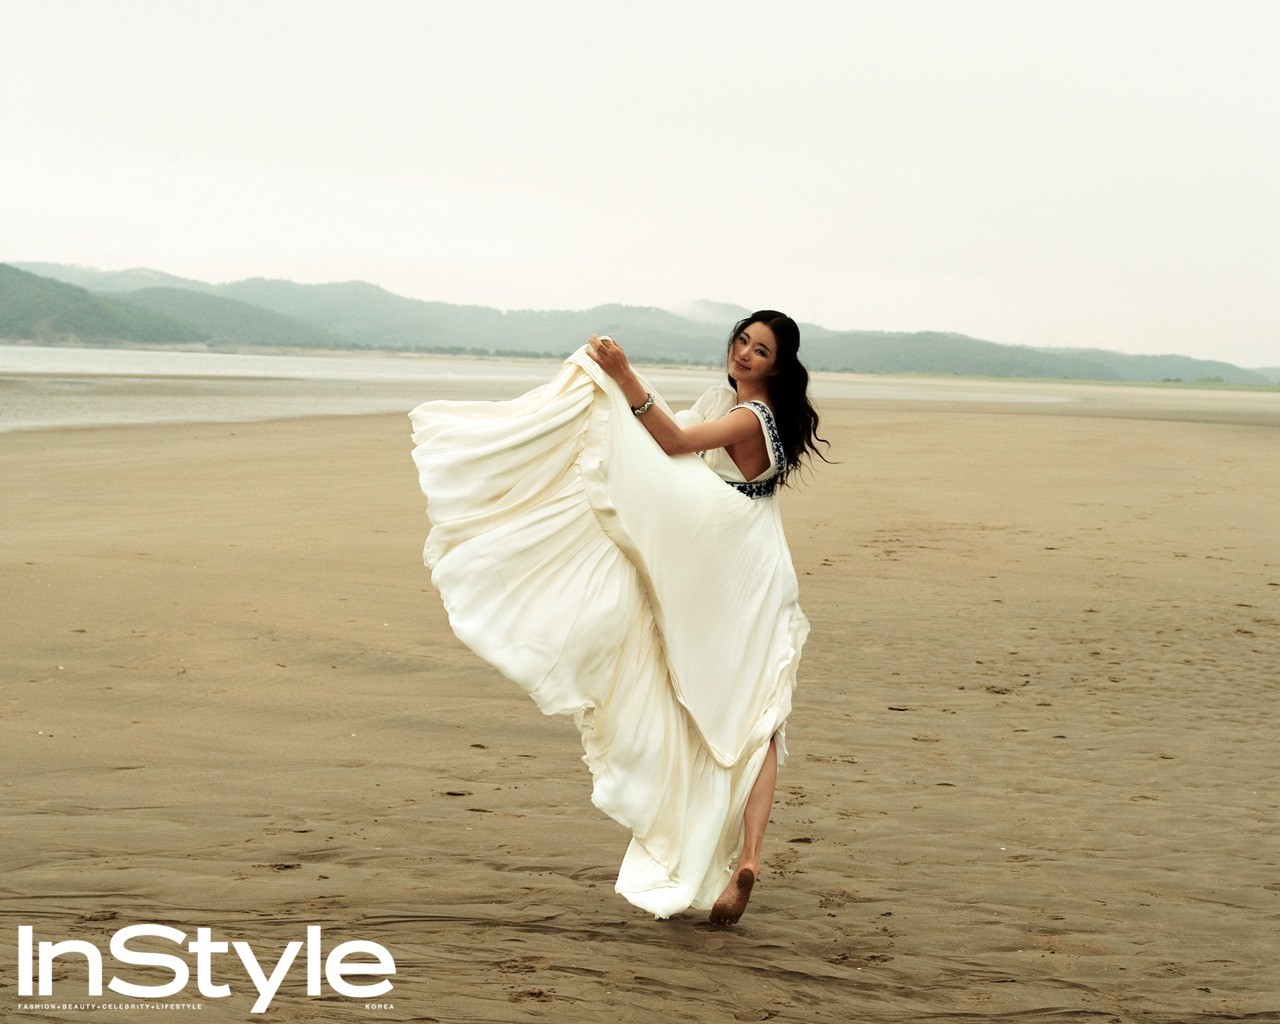 South Korea Instyle Cover Model #28 - 1280x1024